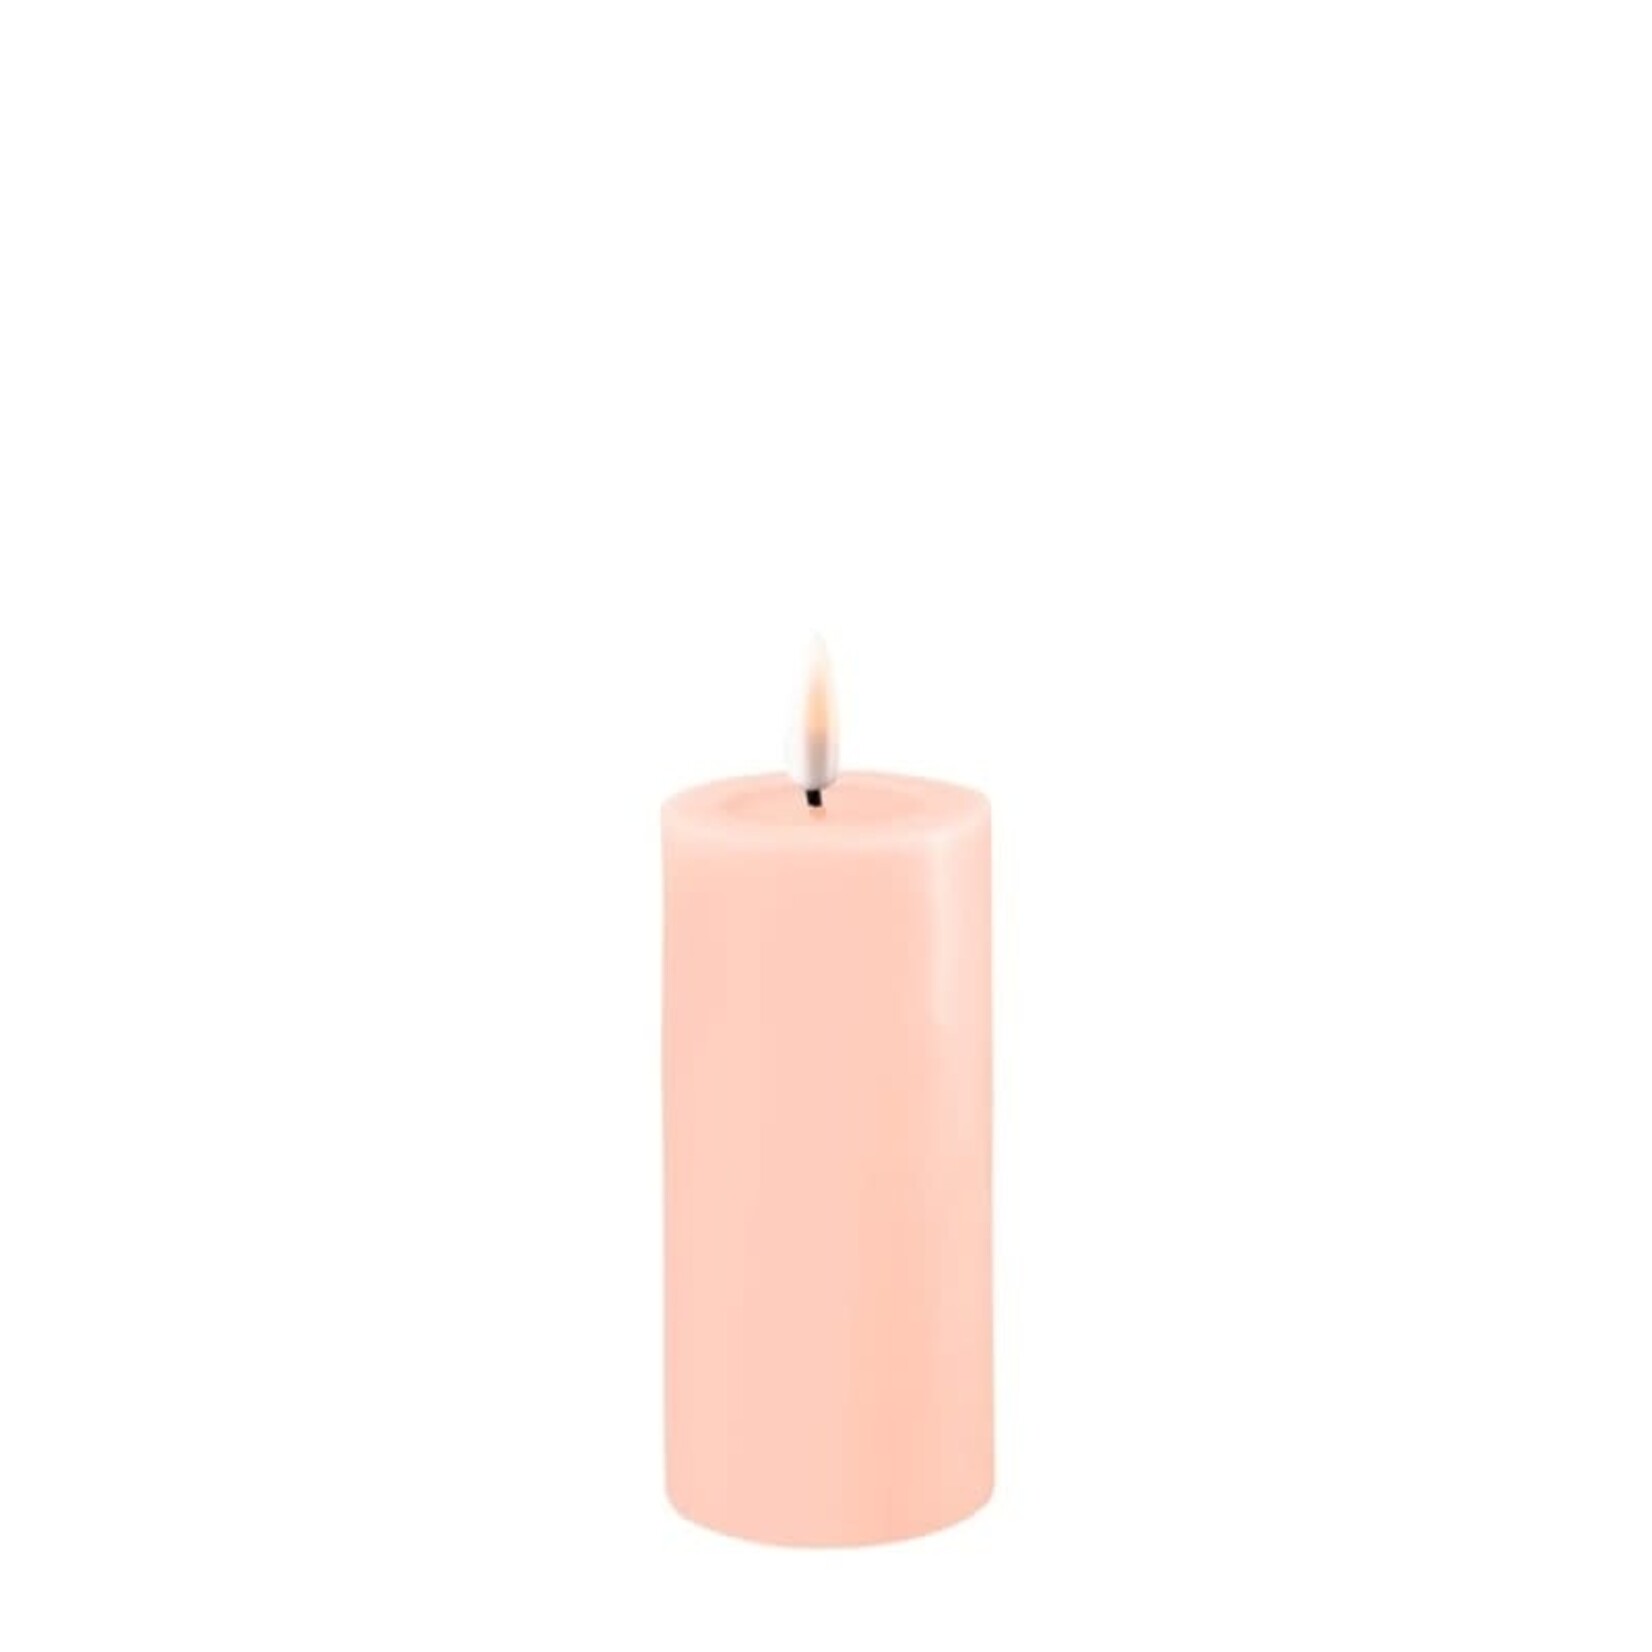 Deluxe Homeart Light Pink LED Candle D 5 * 10 cm